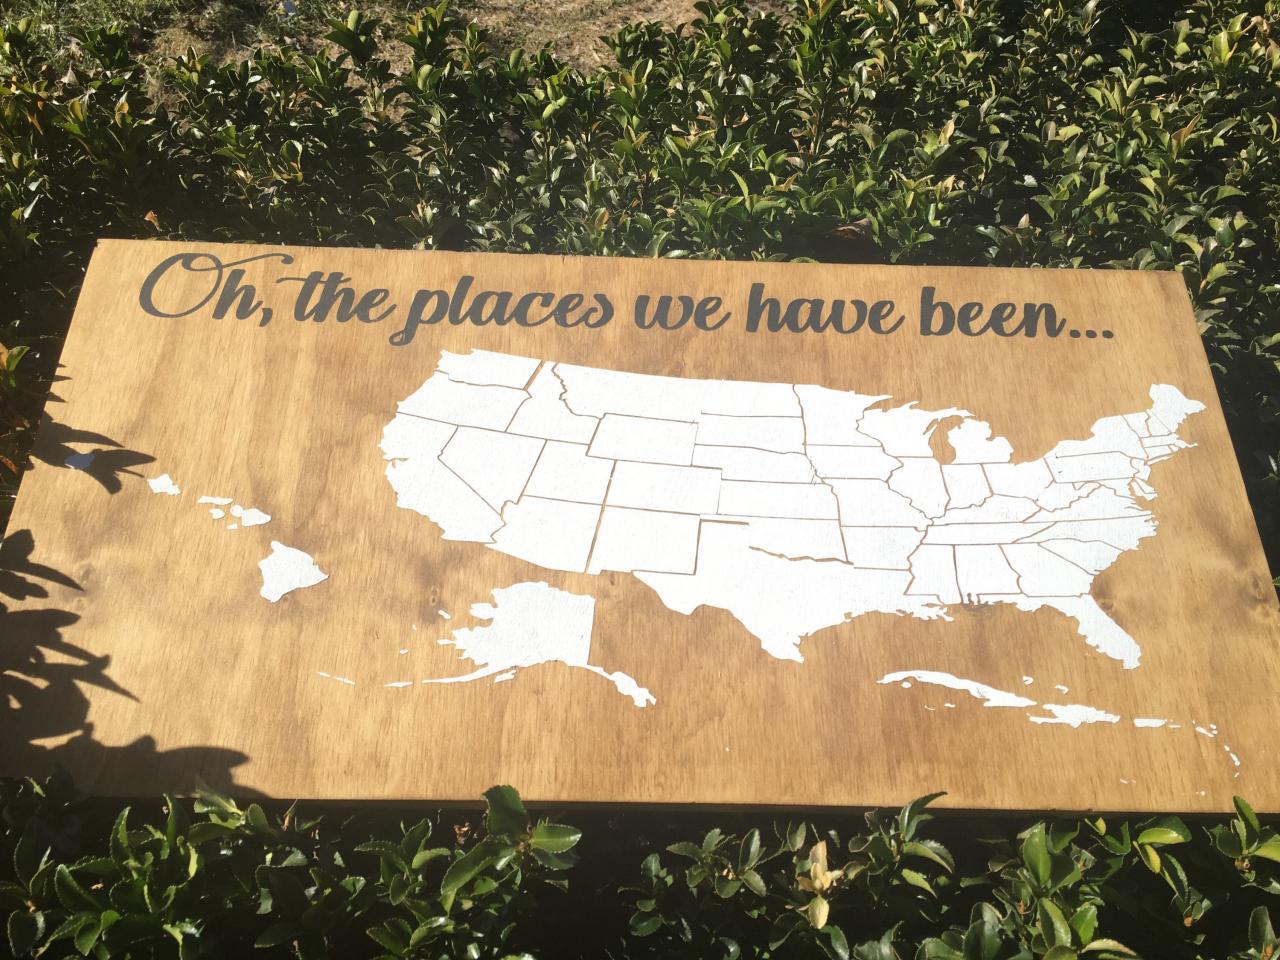 oh, the places we have been 12x24 hand painted wood sign. With hearts to mark places. Map sign. US Map